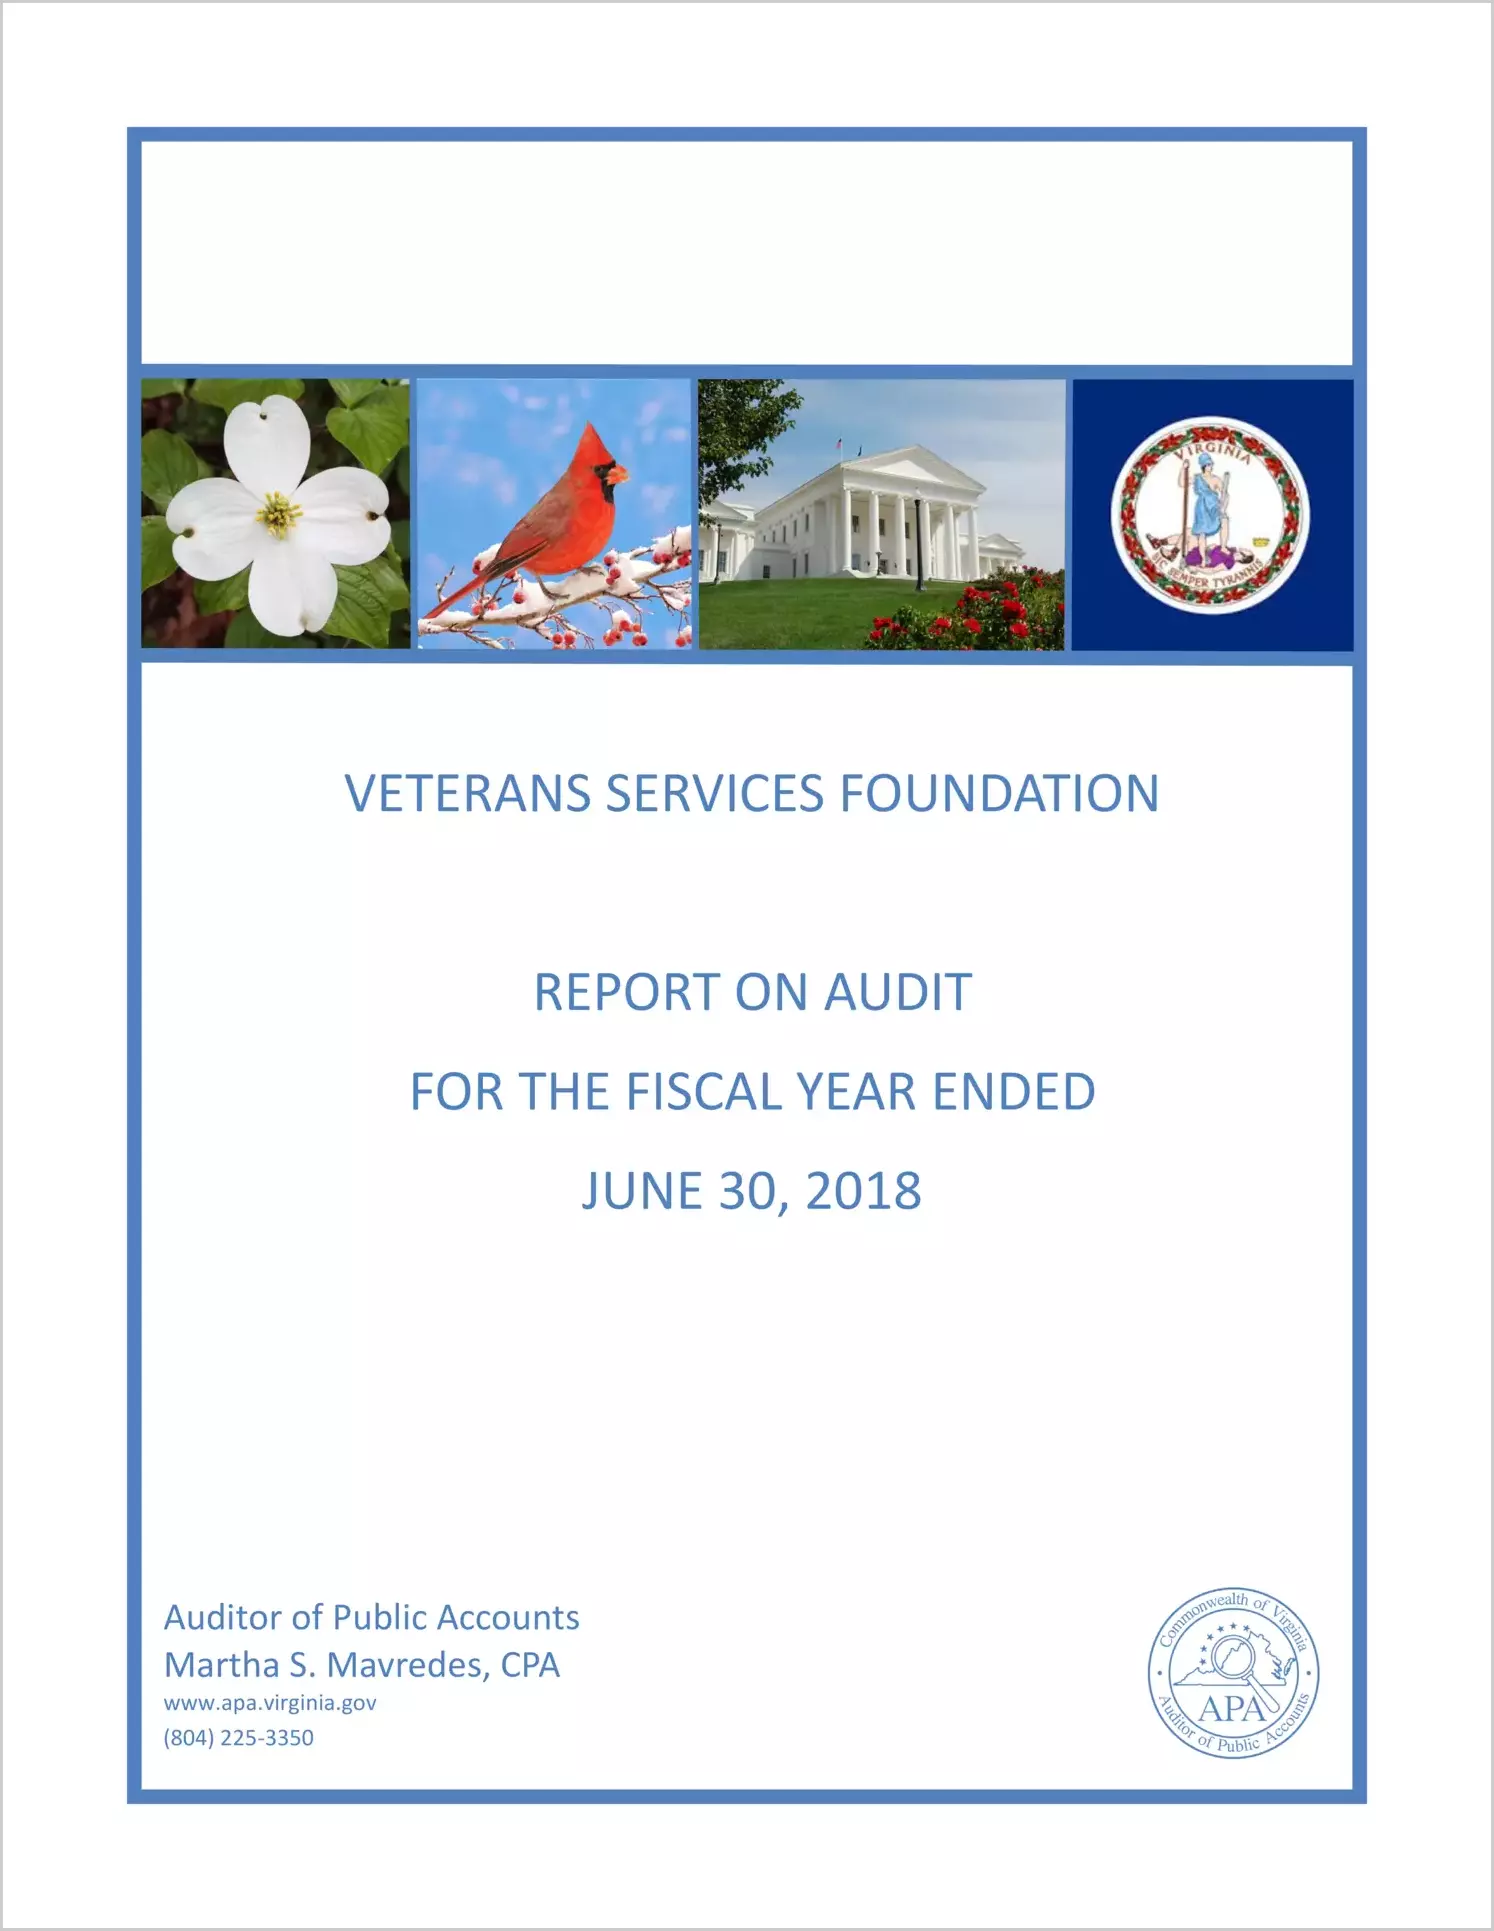 Veterans Services Foundation for the Fiscal Year Ended June 30, 2018